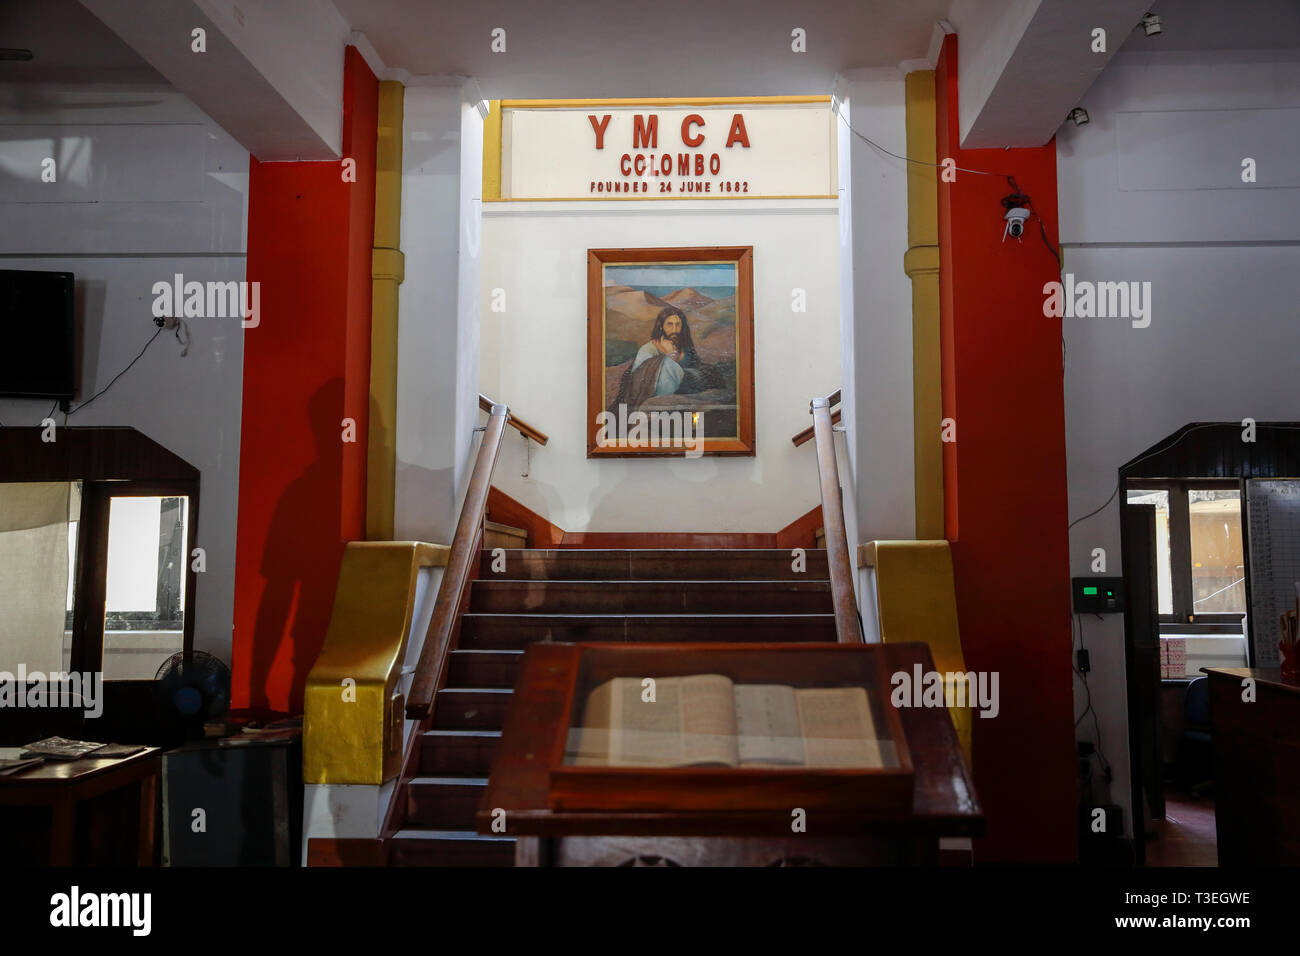 The Young Men's Christian Association (YMCA) building in Colombo city, established in 1882. Colombo, Sri Lanka. Stock Photo